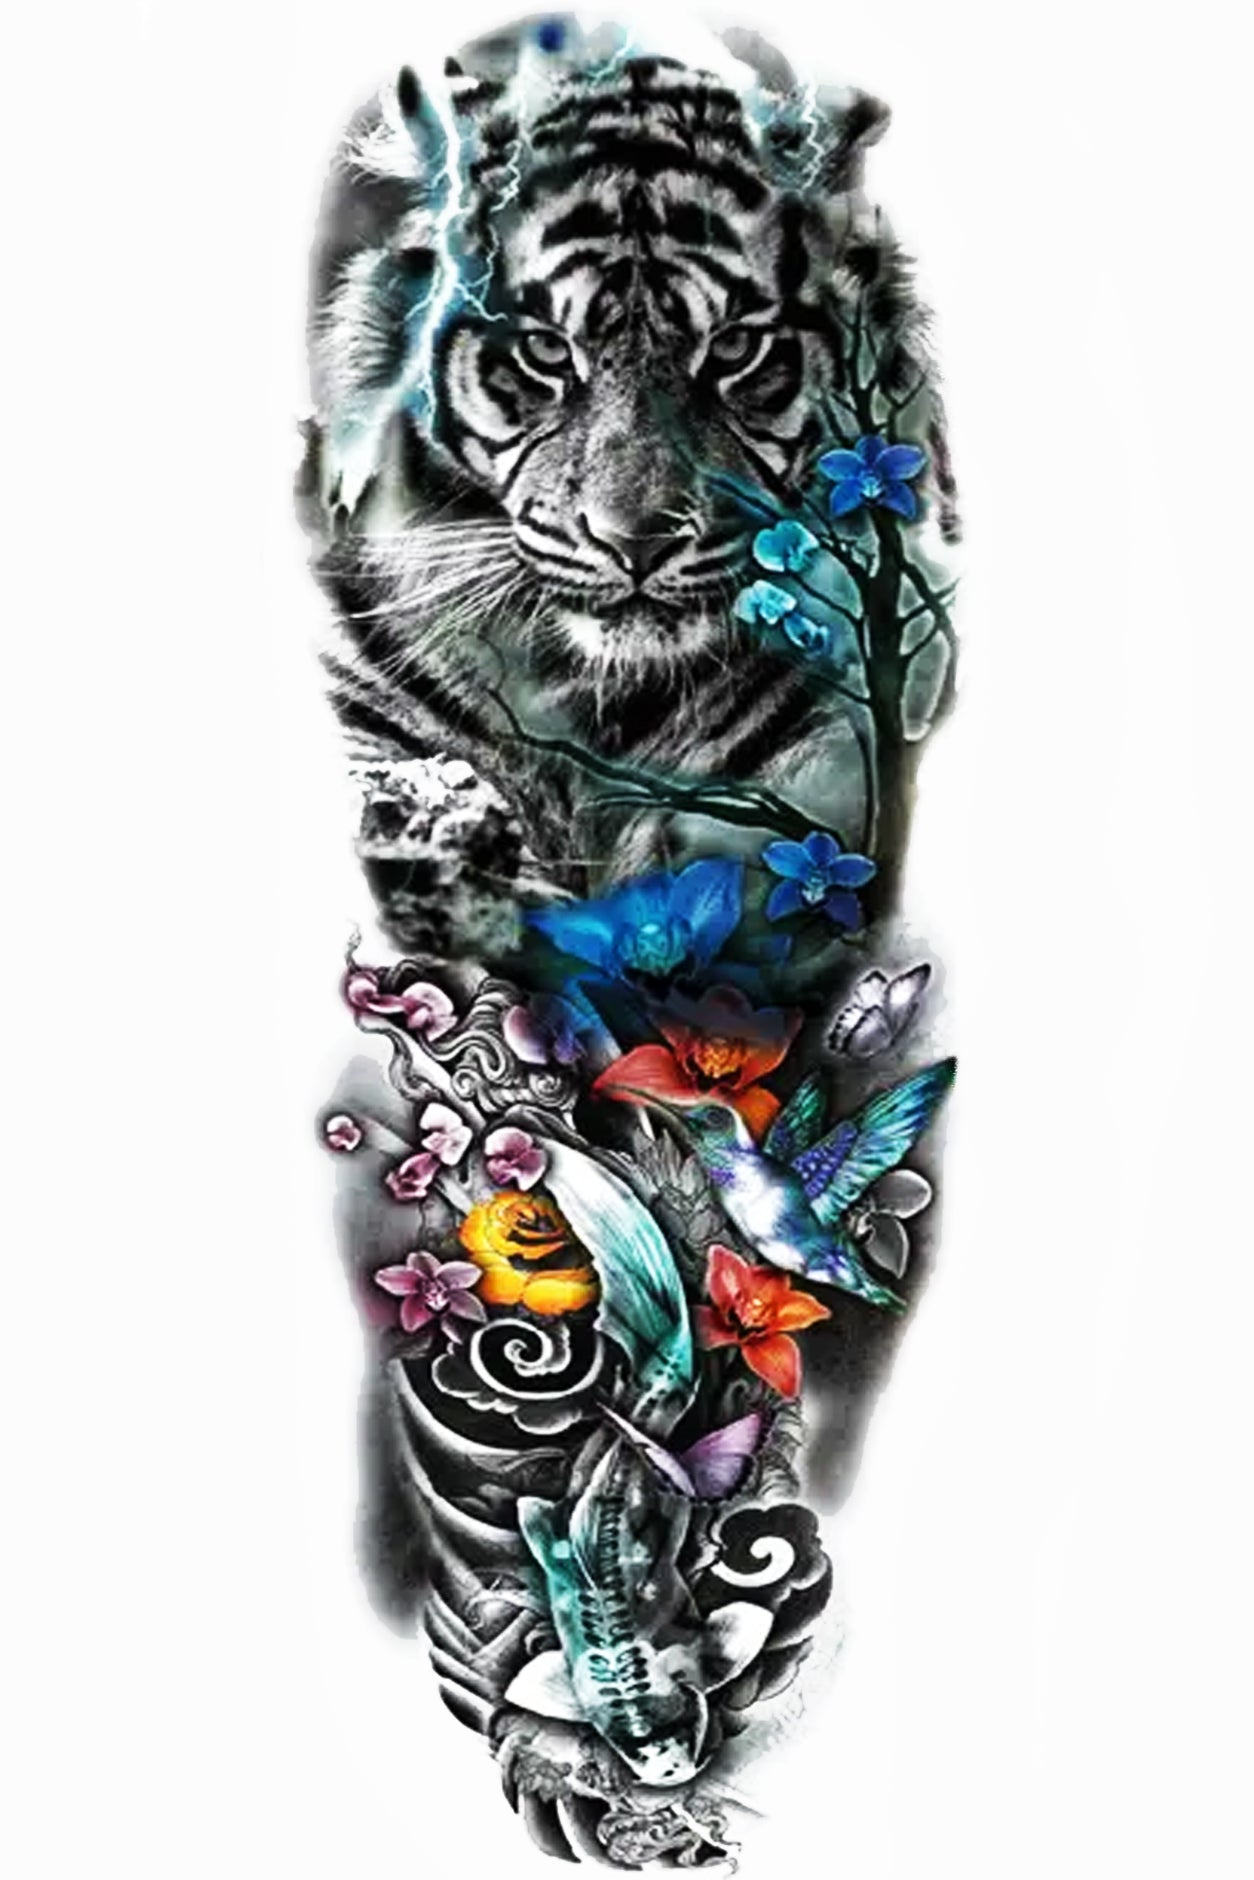 Intelligence, beauty, devotion, and love are symbols that all of these creatures stand for. The tiger, hummingbird, koi fish, and monarch butterfly are all fierce fighters and defenders of their territory, regardless of size. This sleeve has many colors highlighting each of the fierce, intelligent creatures; wear it on the arm, back, or leg.